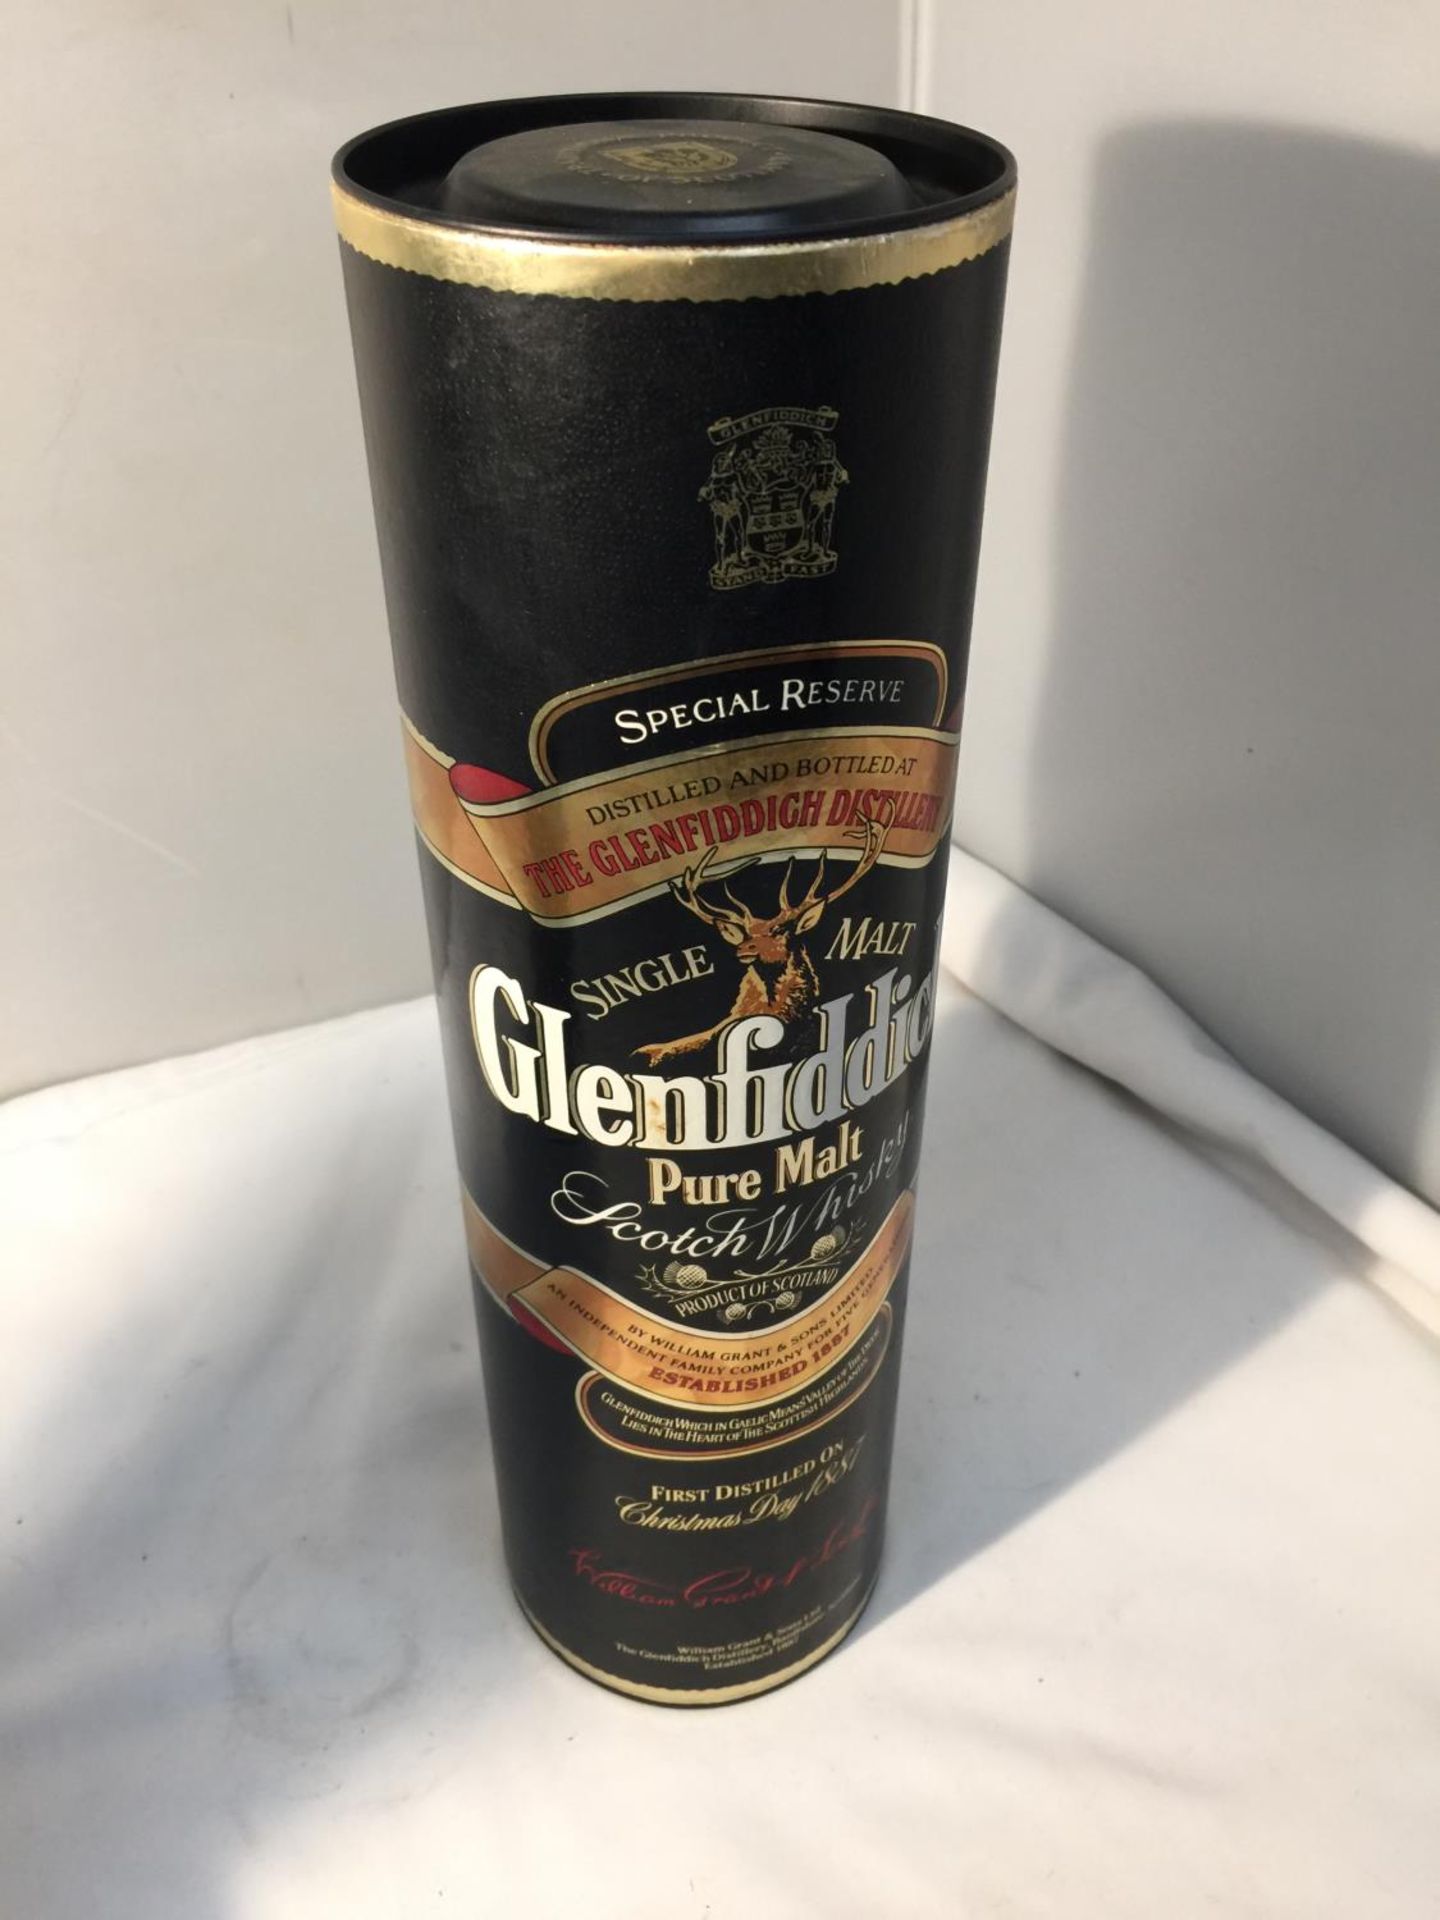 A GLENNFIDDICH SINGLE MALT SPECIAL RESERVE SCOTCH WHISKY. 70CL 40% VOL. PROCEEDS TO GO TO EAST - Image 9 of 9